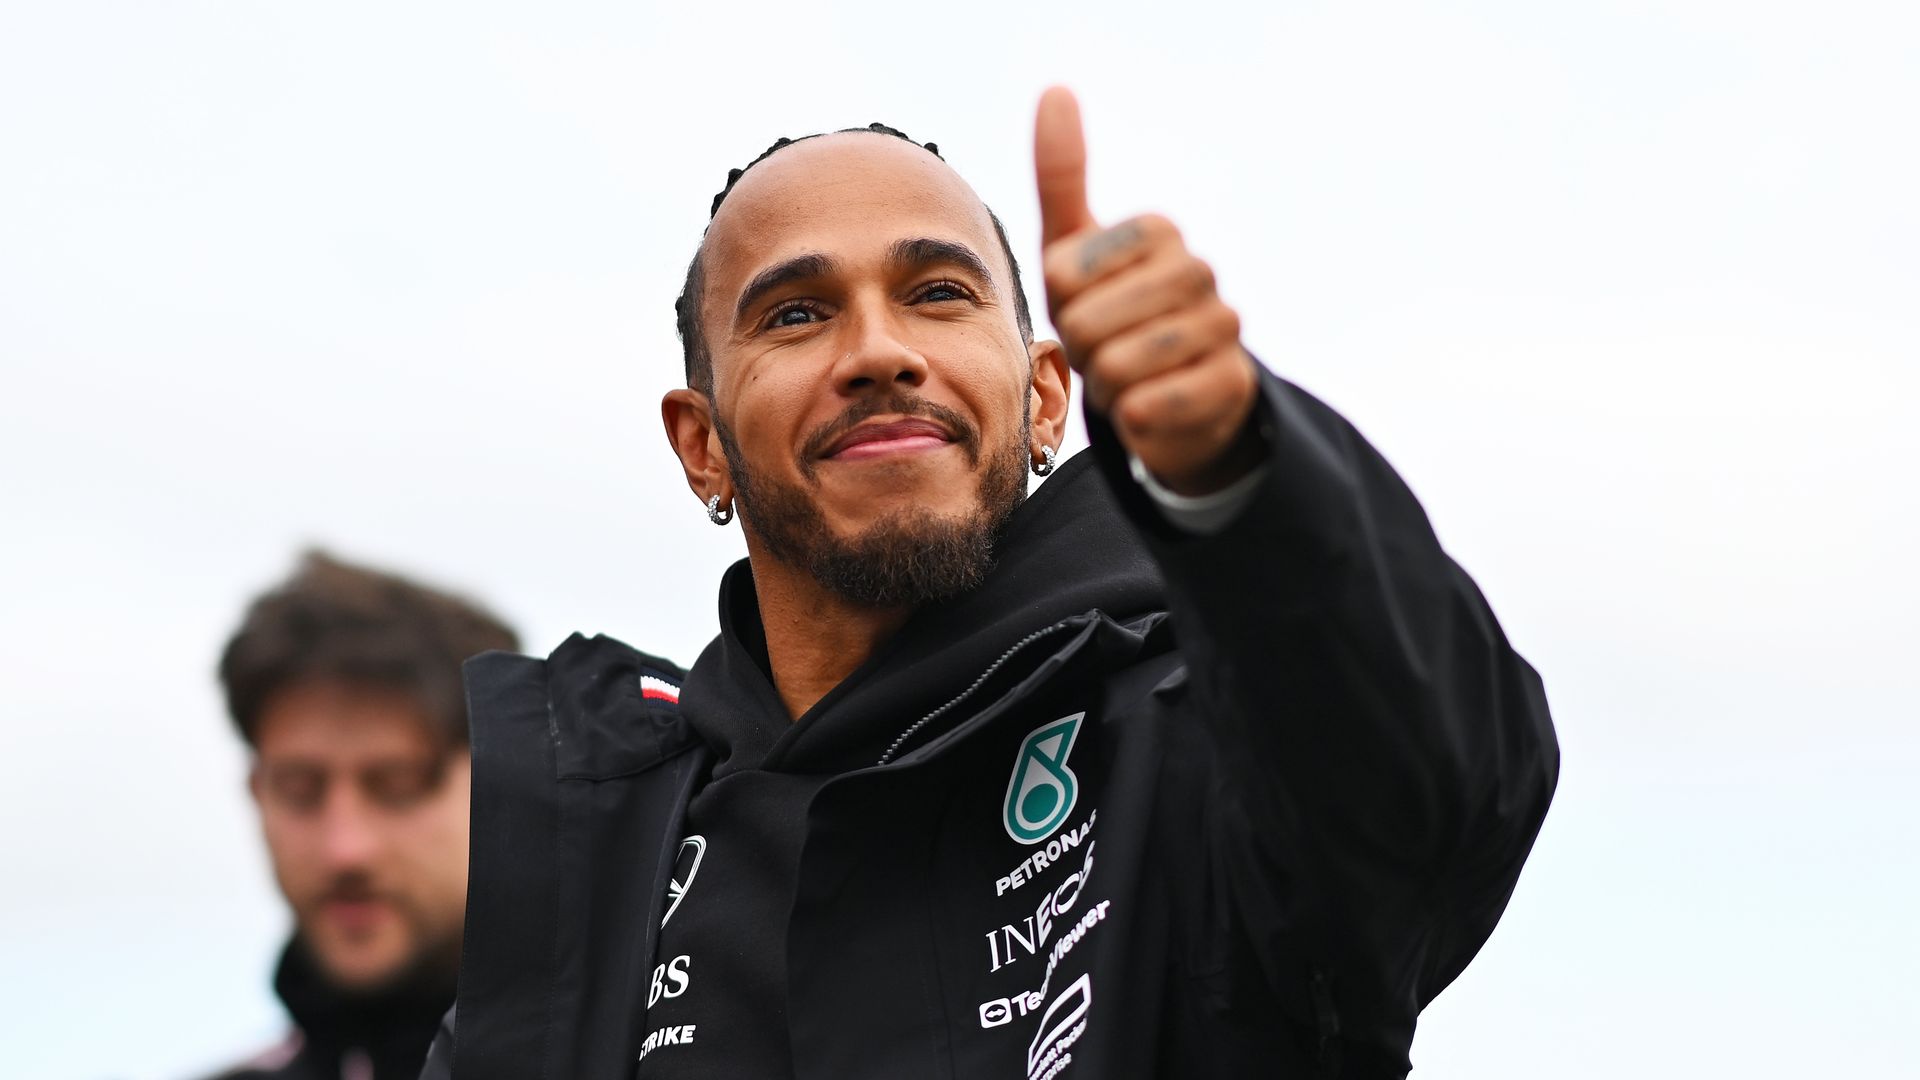 Lewis Hamilton's dog Roscoe is now fully vegan: The benefits of a plant-based diet